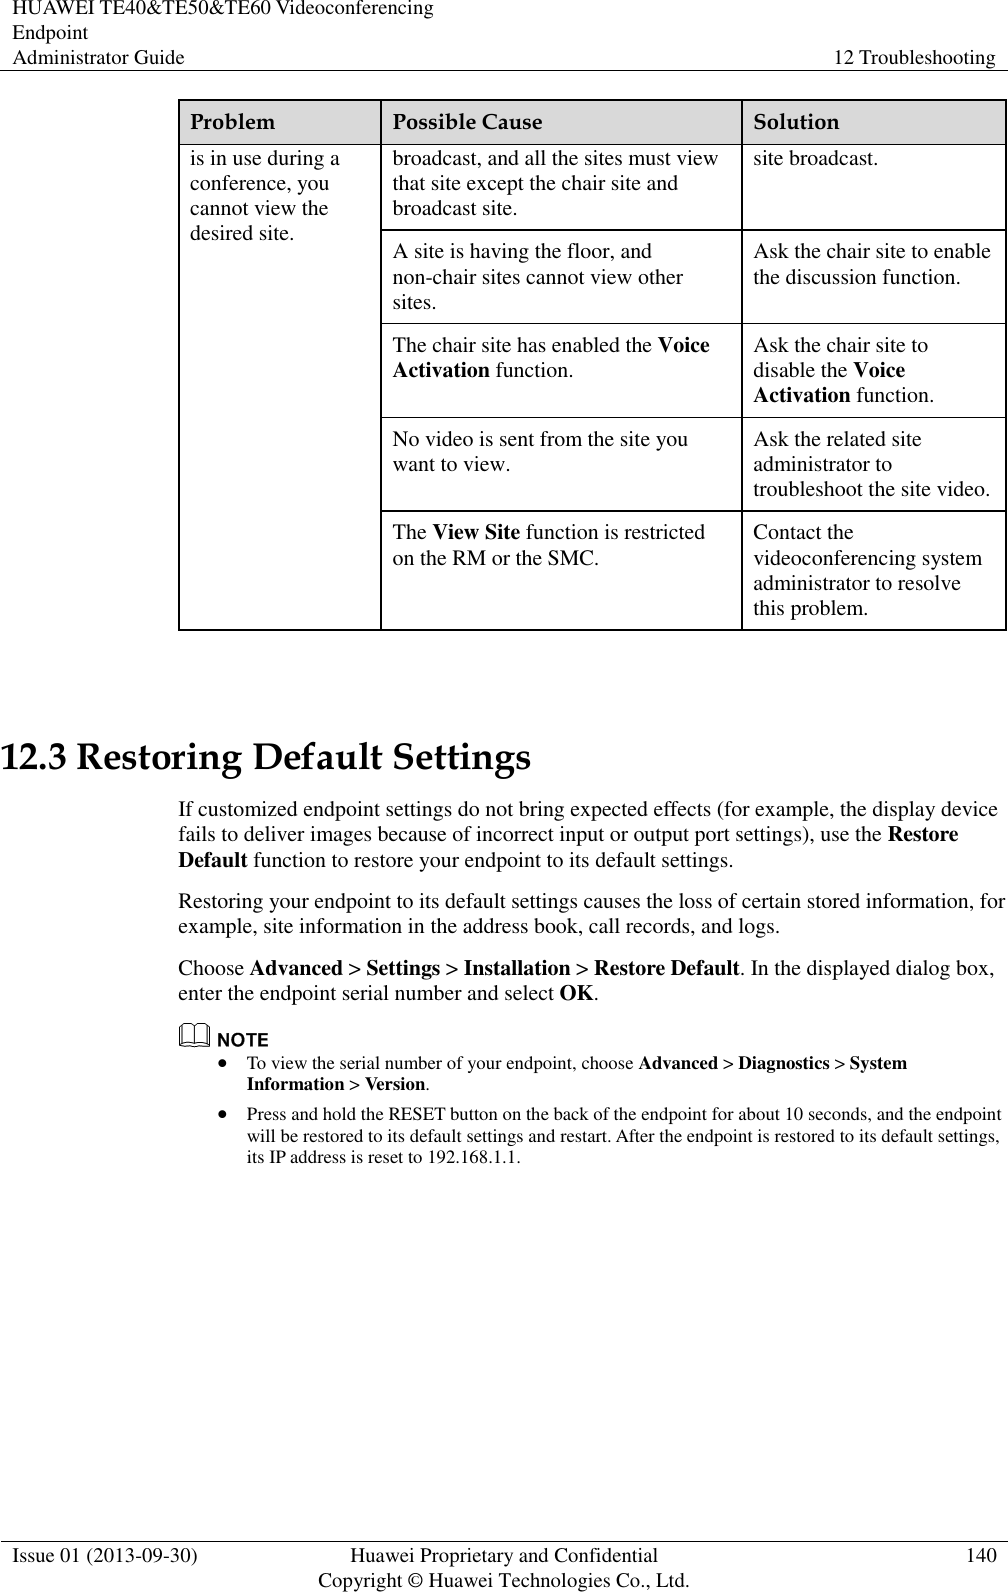 HUAWEI TE40&amp;TE50&amp;TE60 Videoconferencing Endpoint Administrator Guide 12 Troubleshooting  Issue 01 (2013-09-30) Huawei Proprietary and Confidential                                     Copyright © Huawei Technologies Co., Ltd. 140  Problem Possible Cause Solution is in use during a conference, you cannot view the desired site. broadcast, and all the sites must view that site except the chair site and broadcast site. site broadcast. A site is having the floor, and non-chair sites cannot view other sites. Ask the chair site to enable the discussion function. The chair site has enabled the Voice Activation function. Ask the chair site to disable the Voice Activation function. No video is sent from the site you want to view. Ask the related site administrator to troubleshoot the site video. The View Site function is restricted on the RM or the SMC. Contact the videoconferencing system administrator to resolve this problem.  12.3 Restoring Default Settings If customized endpoint settings do not bring expected effects (for example, the display device fails to deliver images because of incorrect input or output port settings), use the Restore Default function to restore your endpoint to its default settings. Restoring your endpoint to its default settings causes the loss of certain stored information, for example, site information in the address book, call records, and logs. Choose Advanced &gt; Settings &gt; Installation &gt; Restore Default. In the displayed dialog box, enter the endpoint serial number and select OK.   To view the serial number of your endpoint, choose Advanced &gt; Diagnostics &gt; System Information &gt; Version.  Press and hold the RESET button on the back of the endpoint for about 10 seconds, and the endpoint will be restored to its default settings and restart. After the endpoint is restored to its default settings, its IP address is reset to 192.168.1.1.   